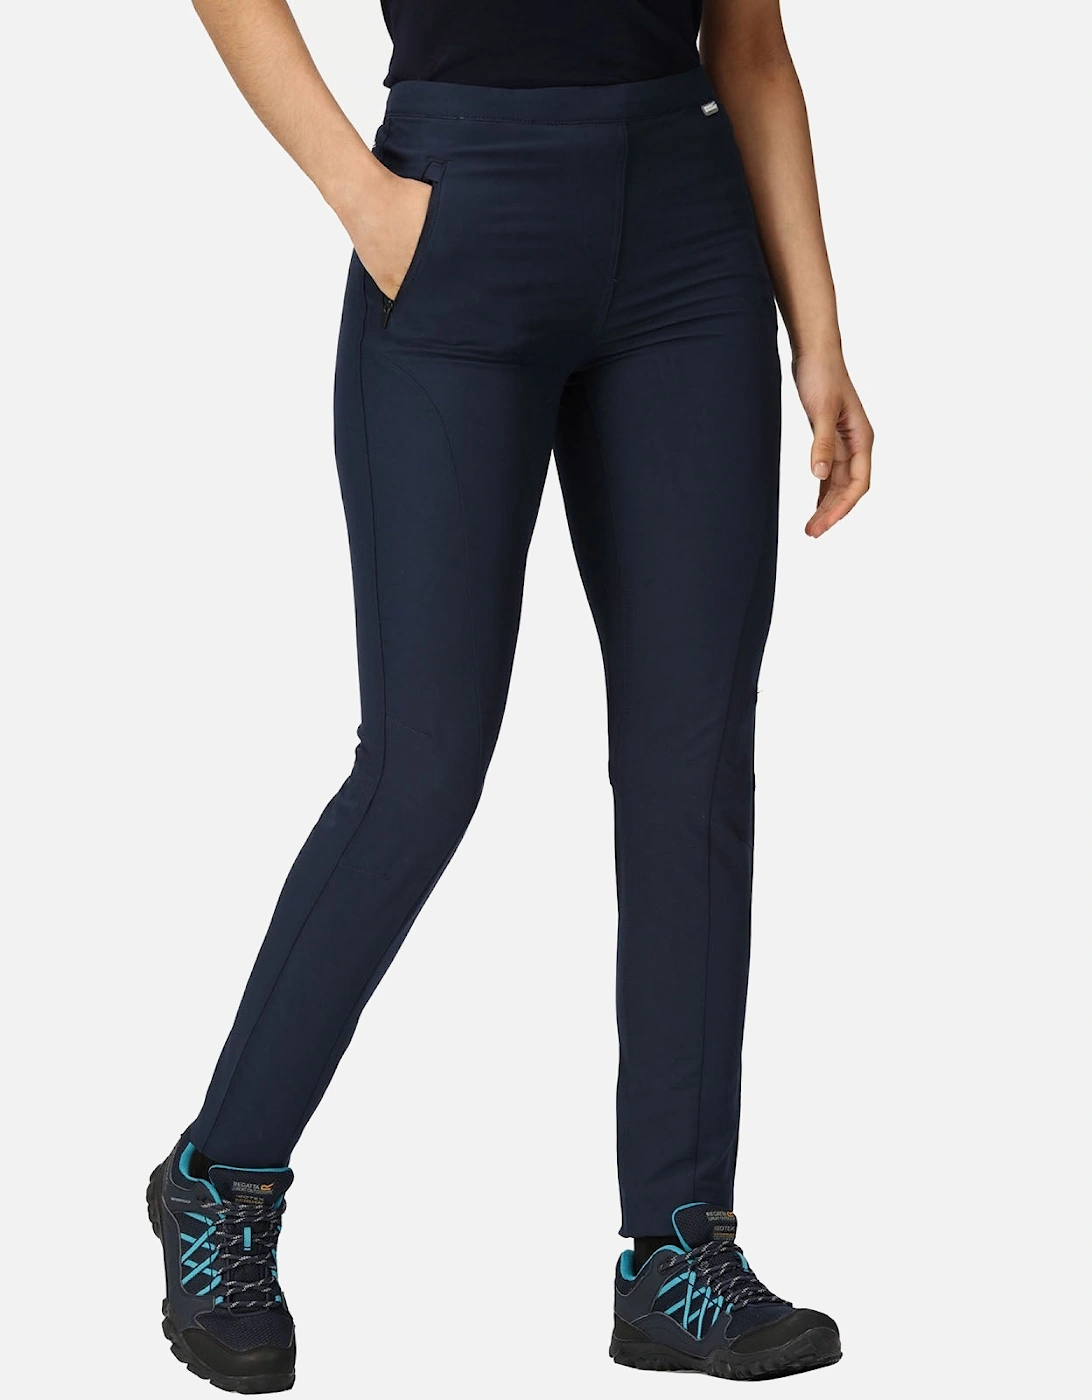 Womens Pentre Stretch Walking Bottoms Trousers - Navy, 10 of 9